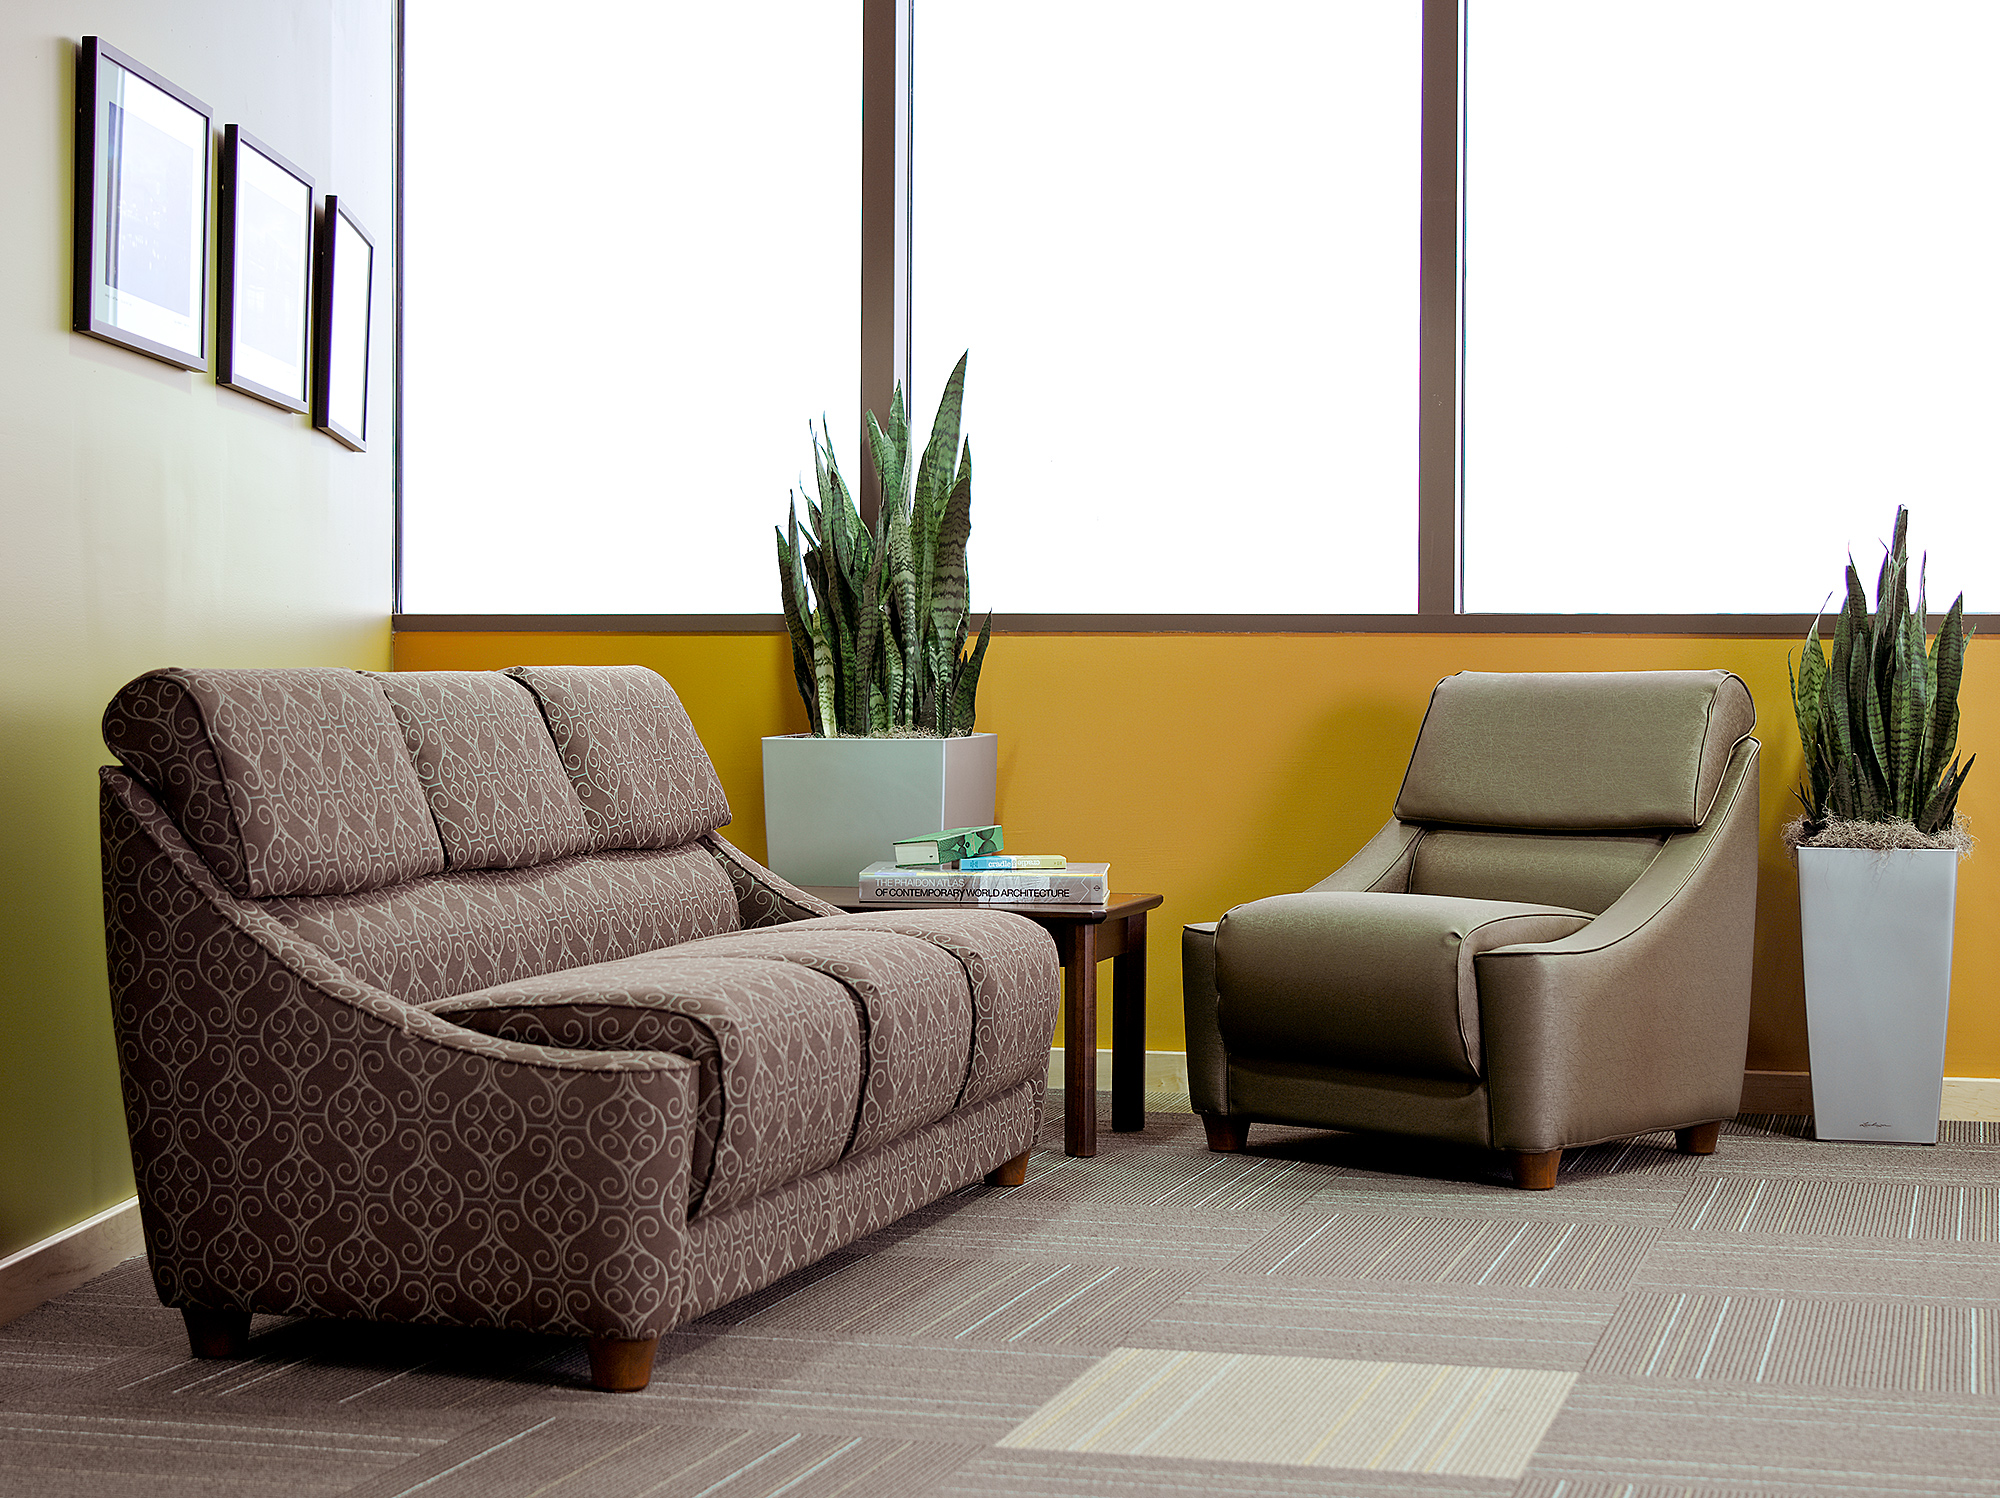 Cavetto Chair and Sofa in college sitting area